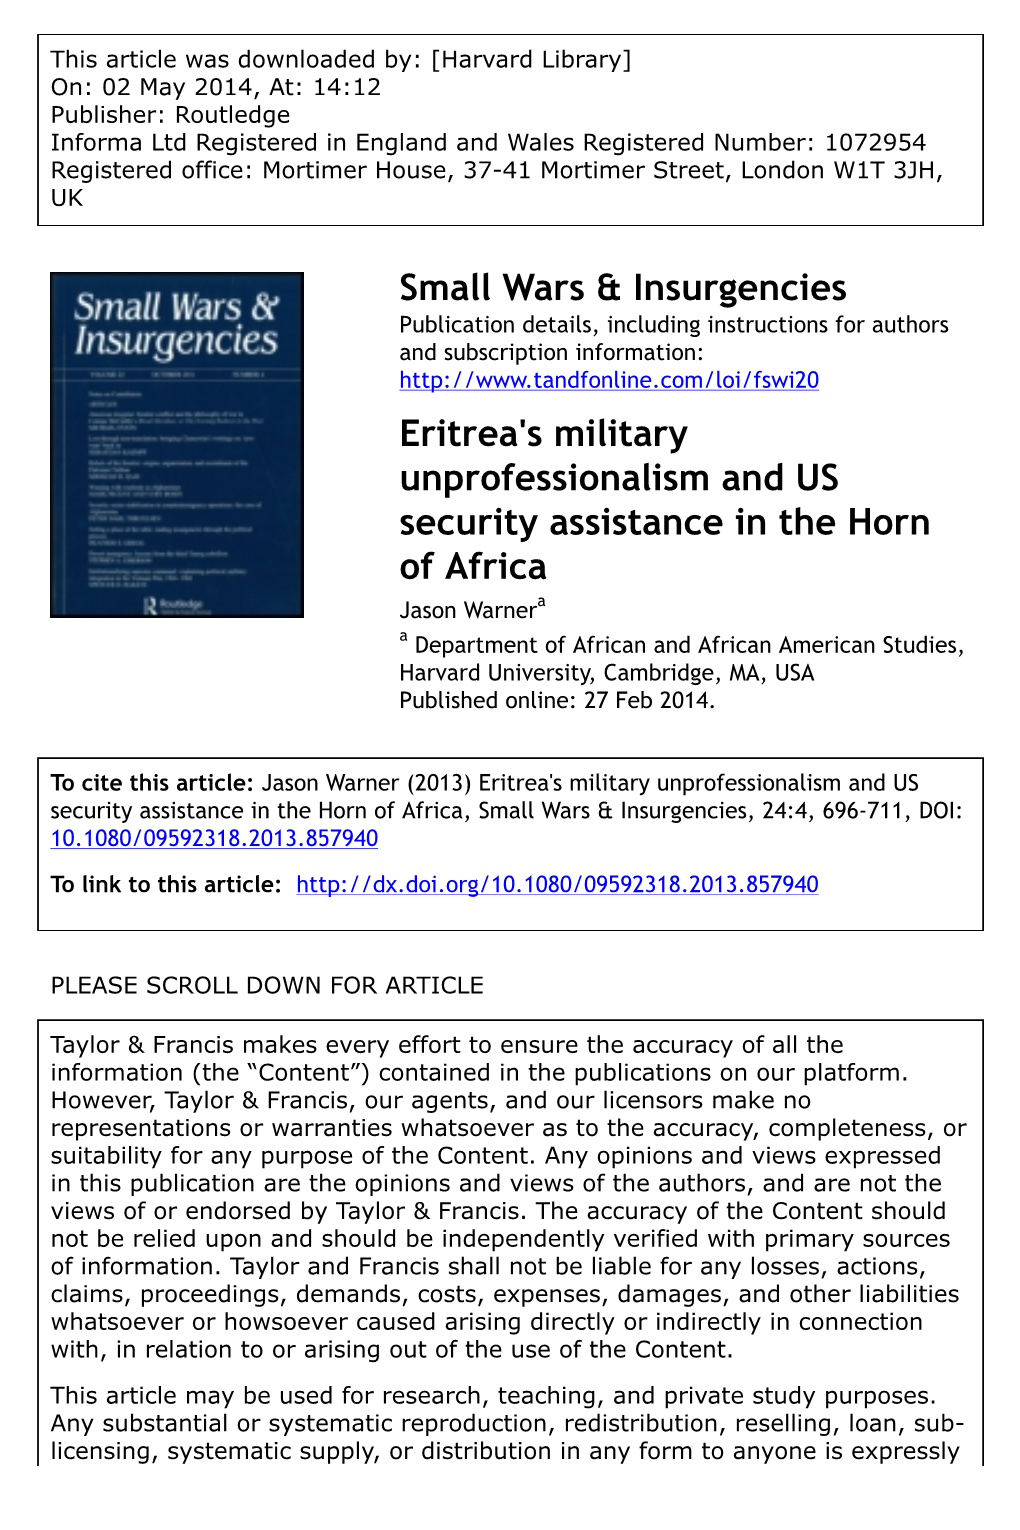 Eritrea's Military Unprofessionalism and US Security Assistance in The